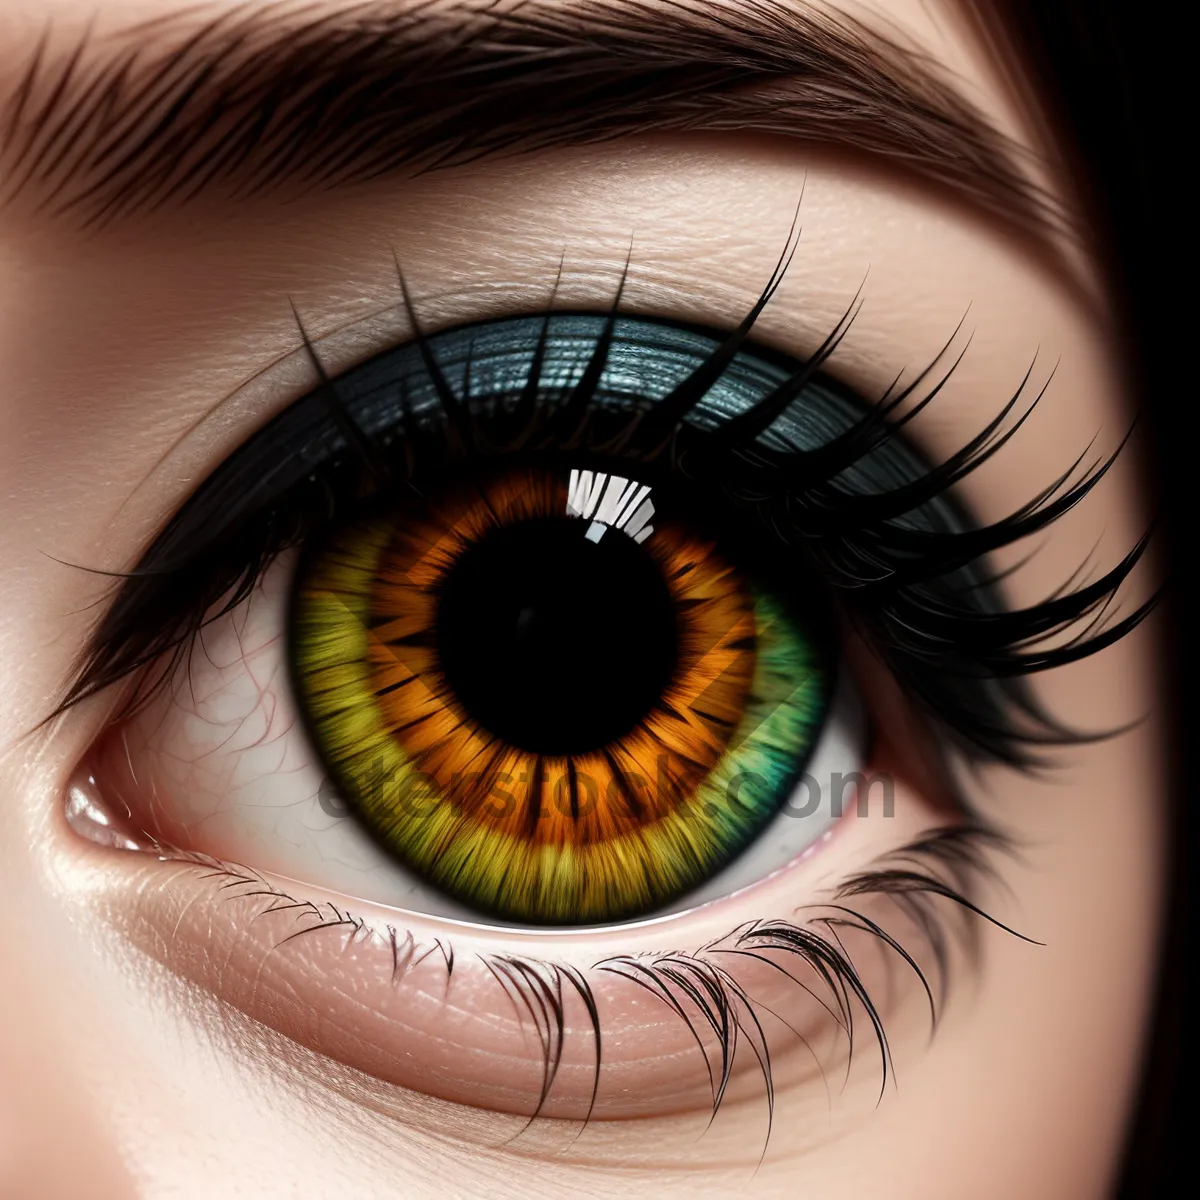 Picture of Captivating Eyeballs: Close-up Vision with Stunning Makeup